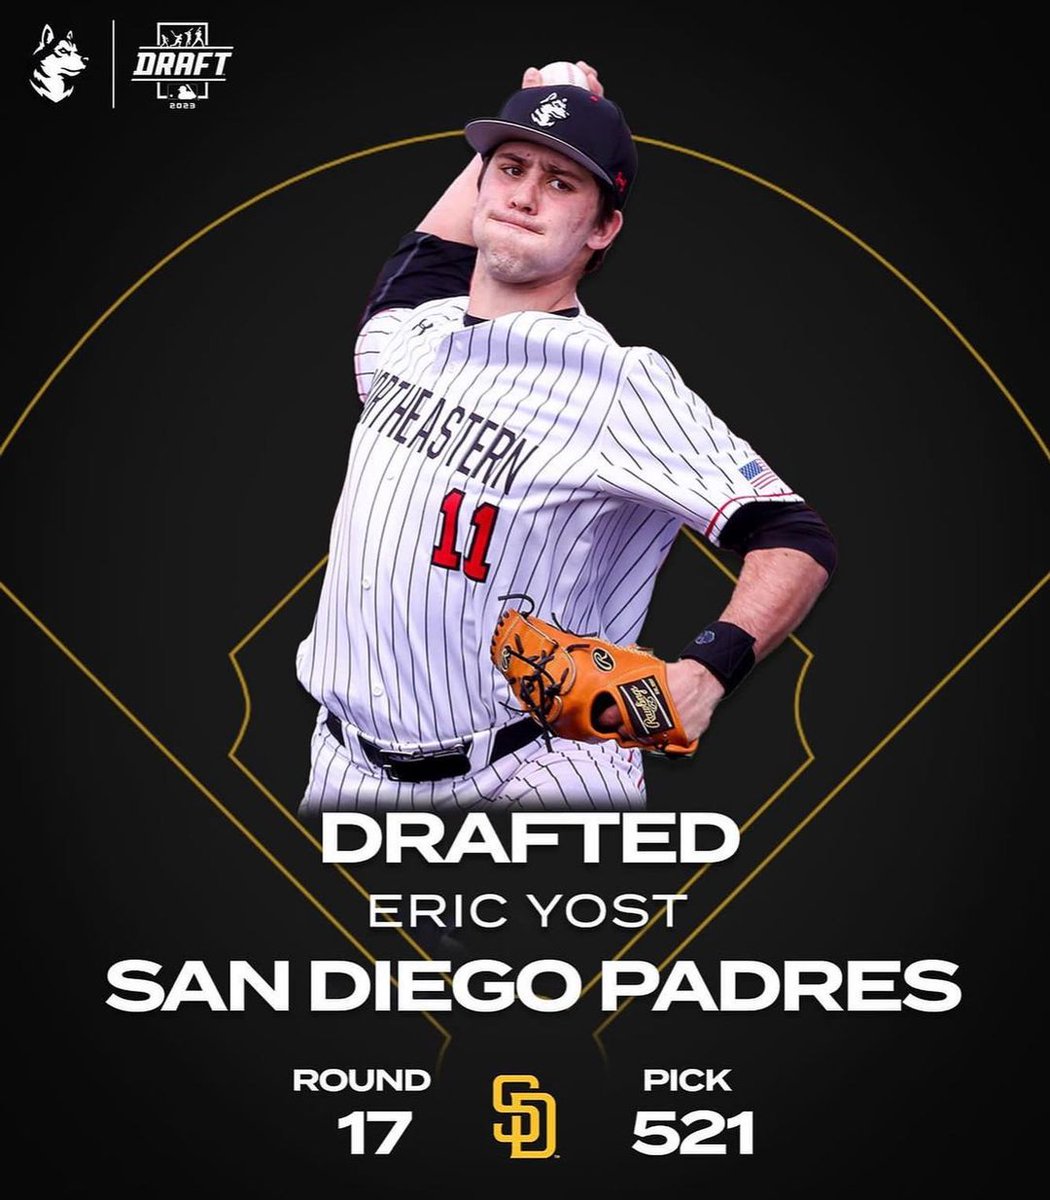 Congratulations to Eric Yost ‘20 on being drafted by the San Diego Padres! #AMDG #FPRamily #fordhamprepalumni @FP_Sports